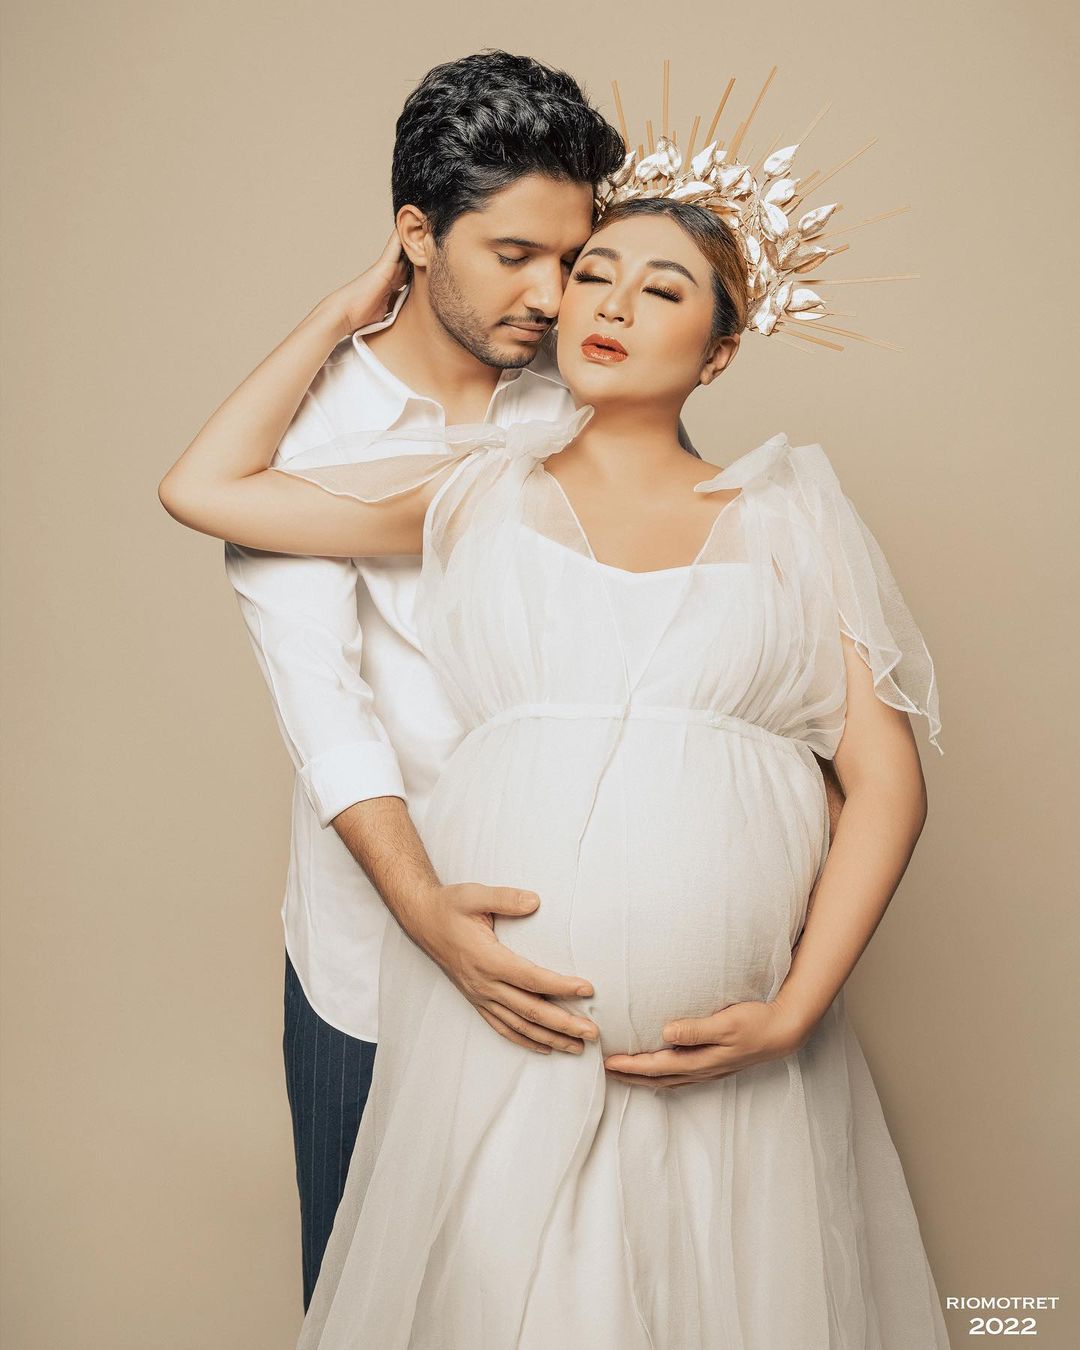 Kumkum Bhagya' Fame, Gautam Nain And His Wife, Soffie Marchue Become  Parents To A Baby Boy